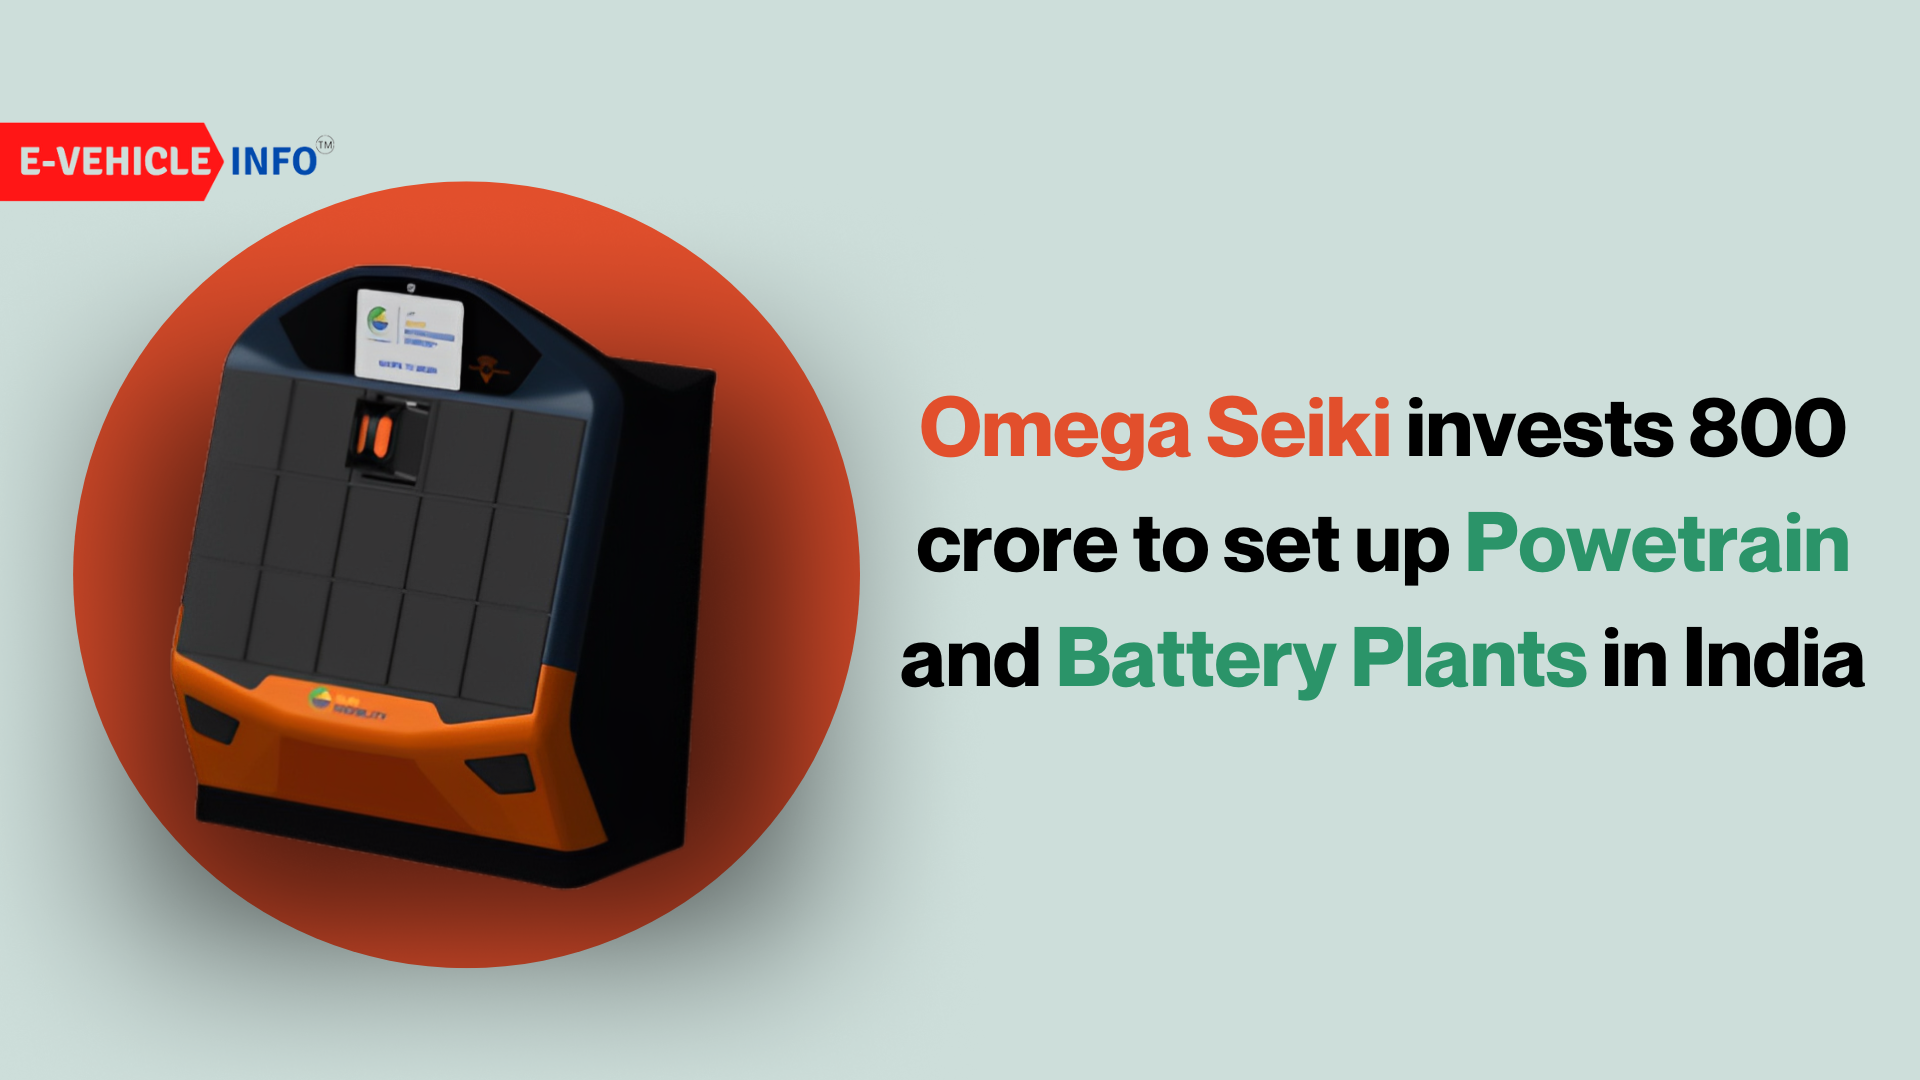 Omega Seiki Invests 800 Crore to Setup Powertrain& Battery Plants in India